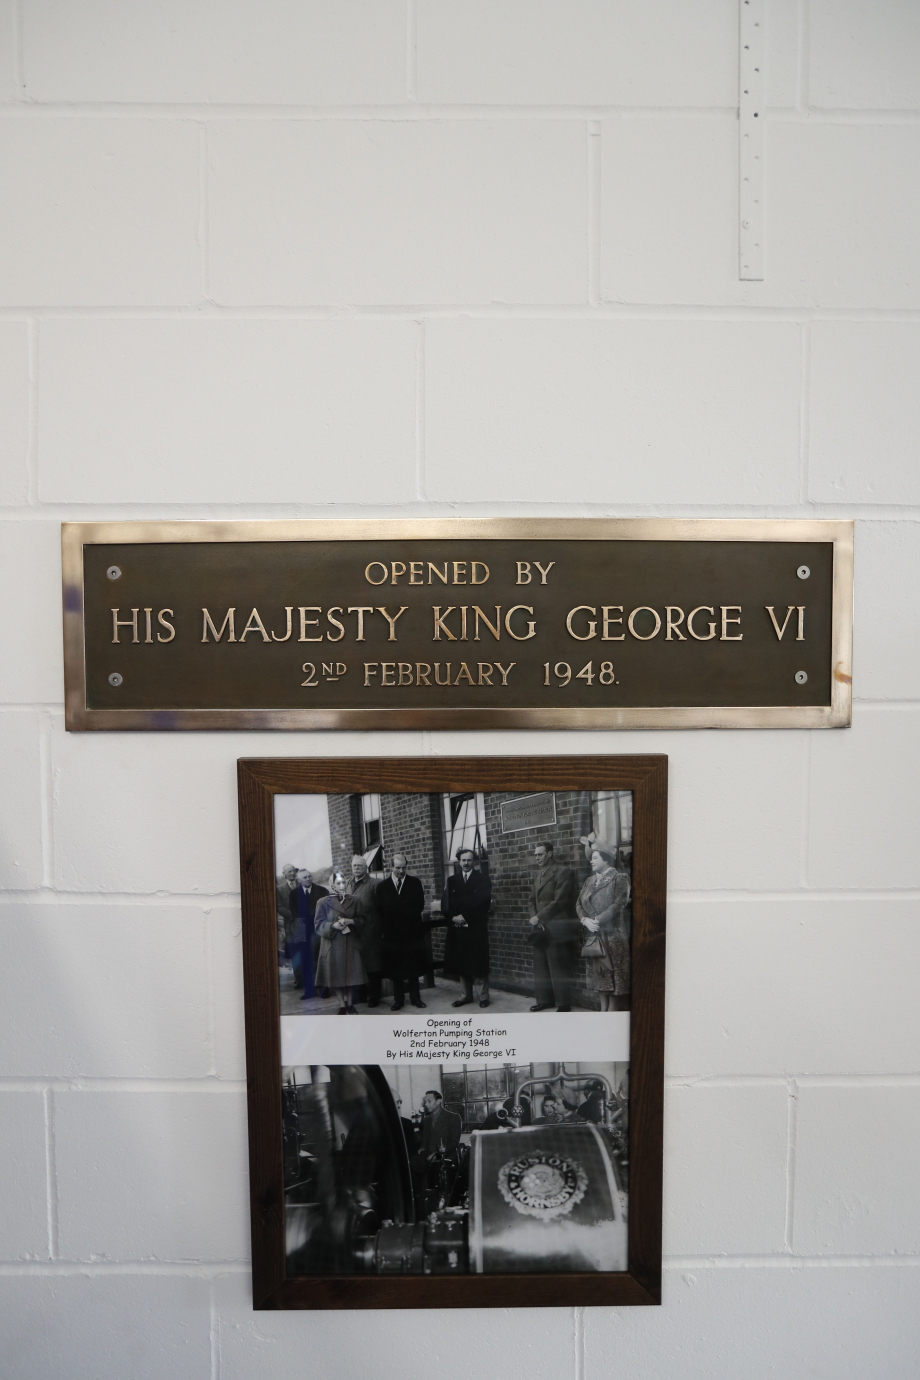 A plaque to commemorate King George VI opening Wolferton Pumping Station in 1948